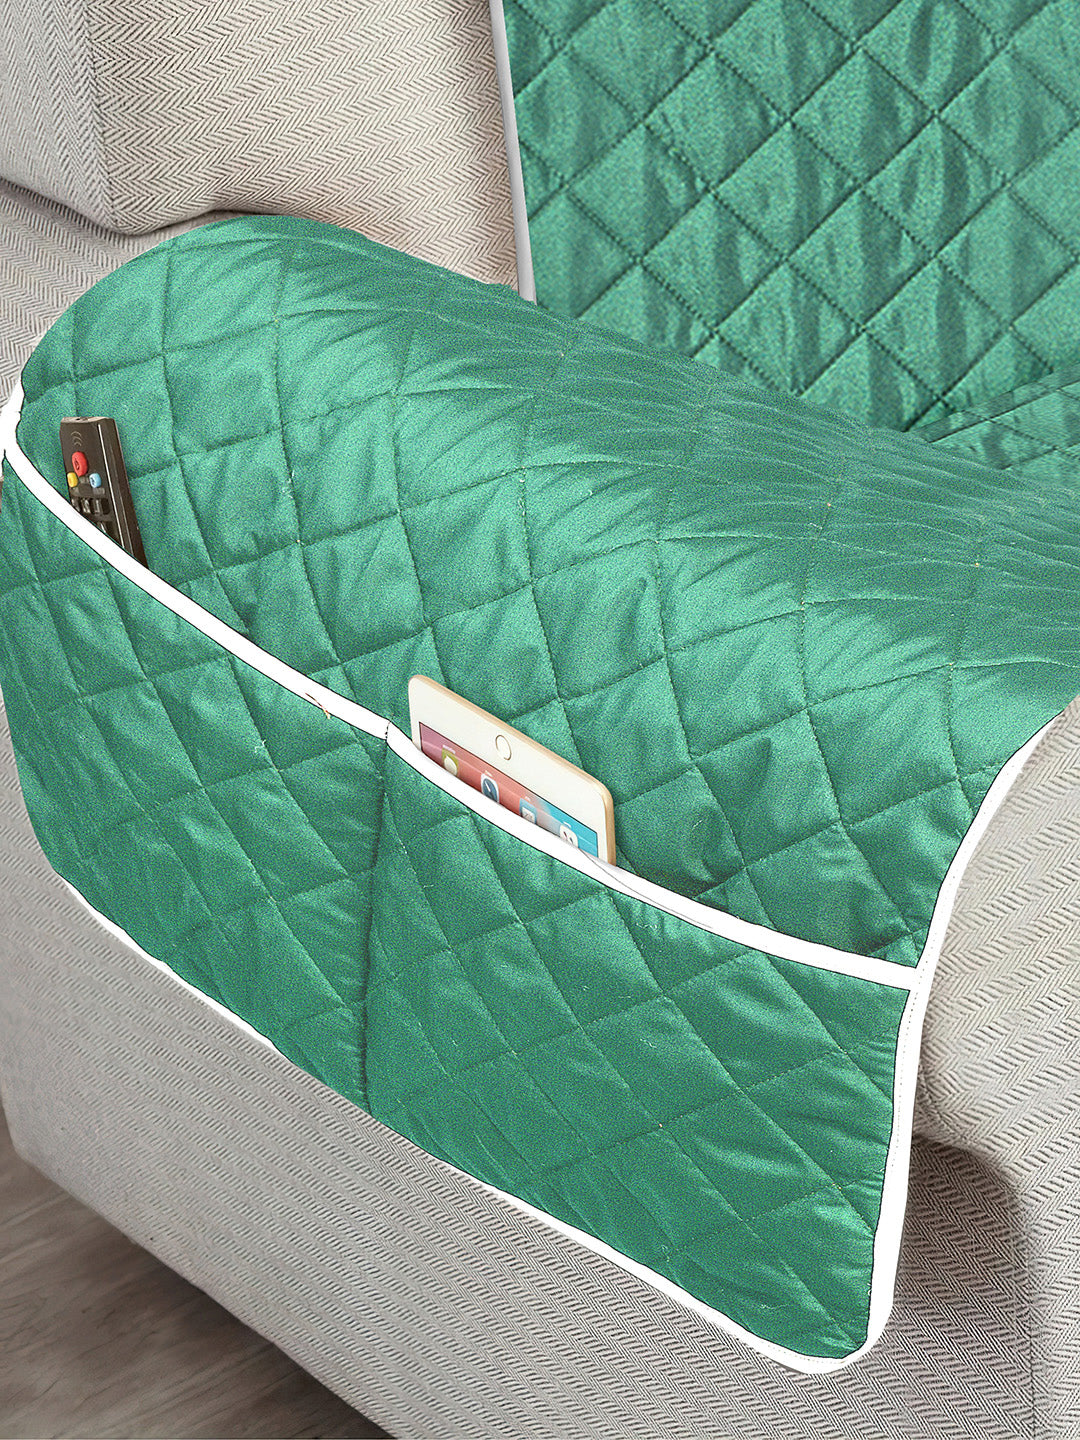 1 Seater Green